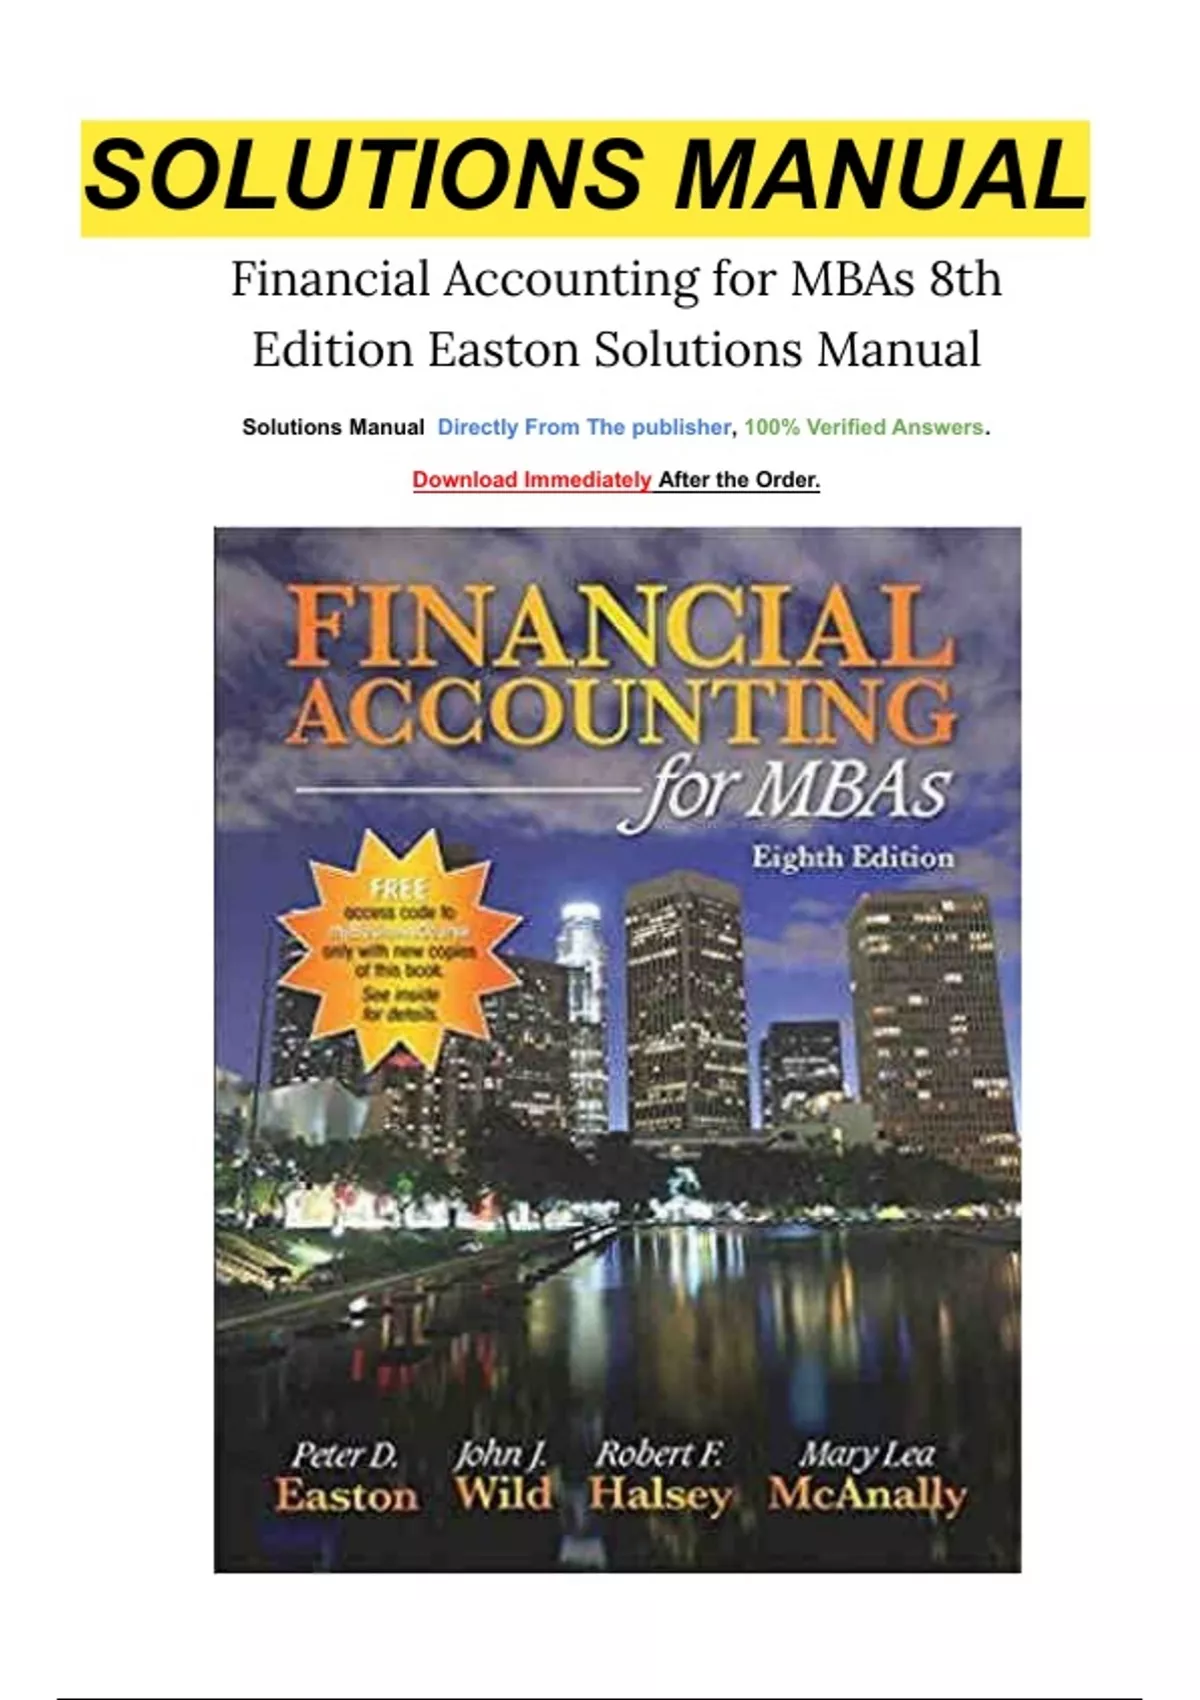 Financial Accounting for MBAs, 8e本